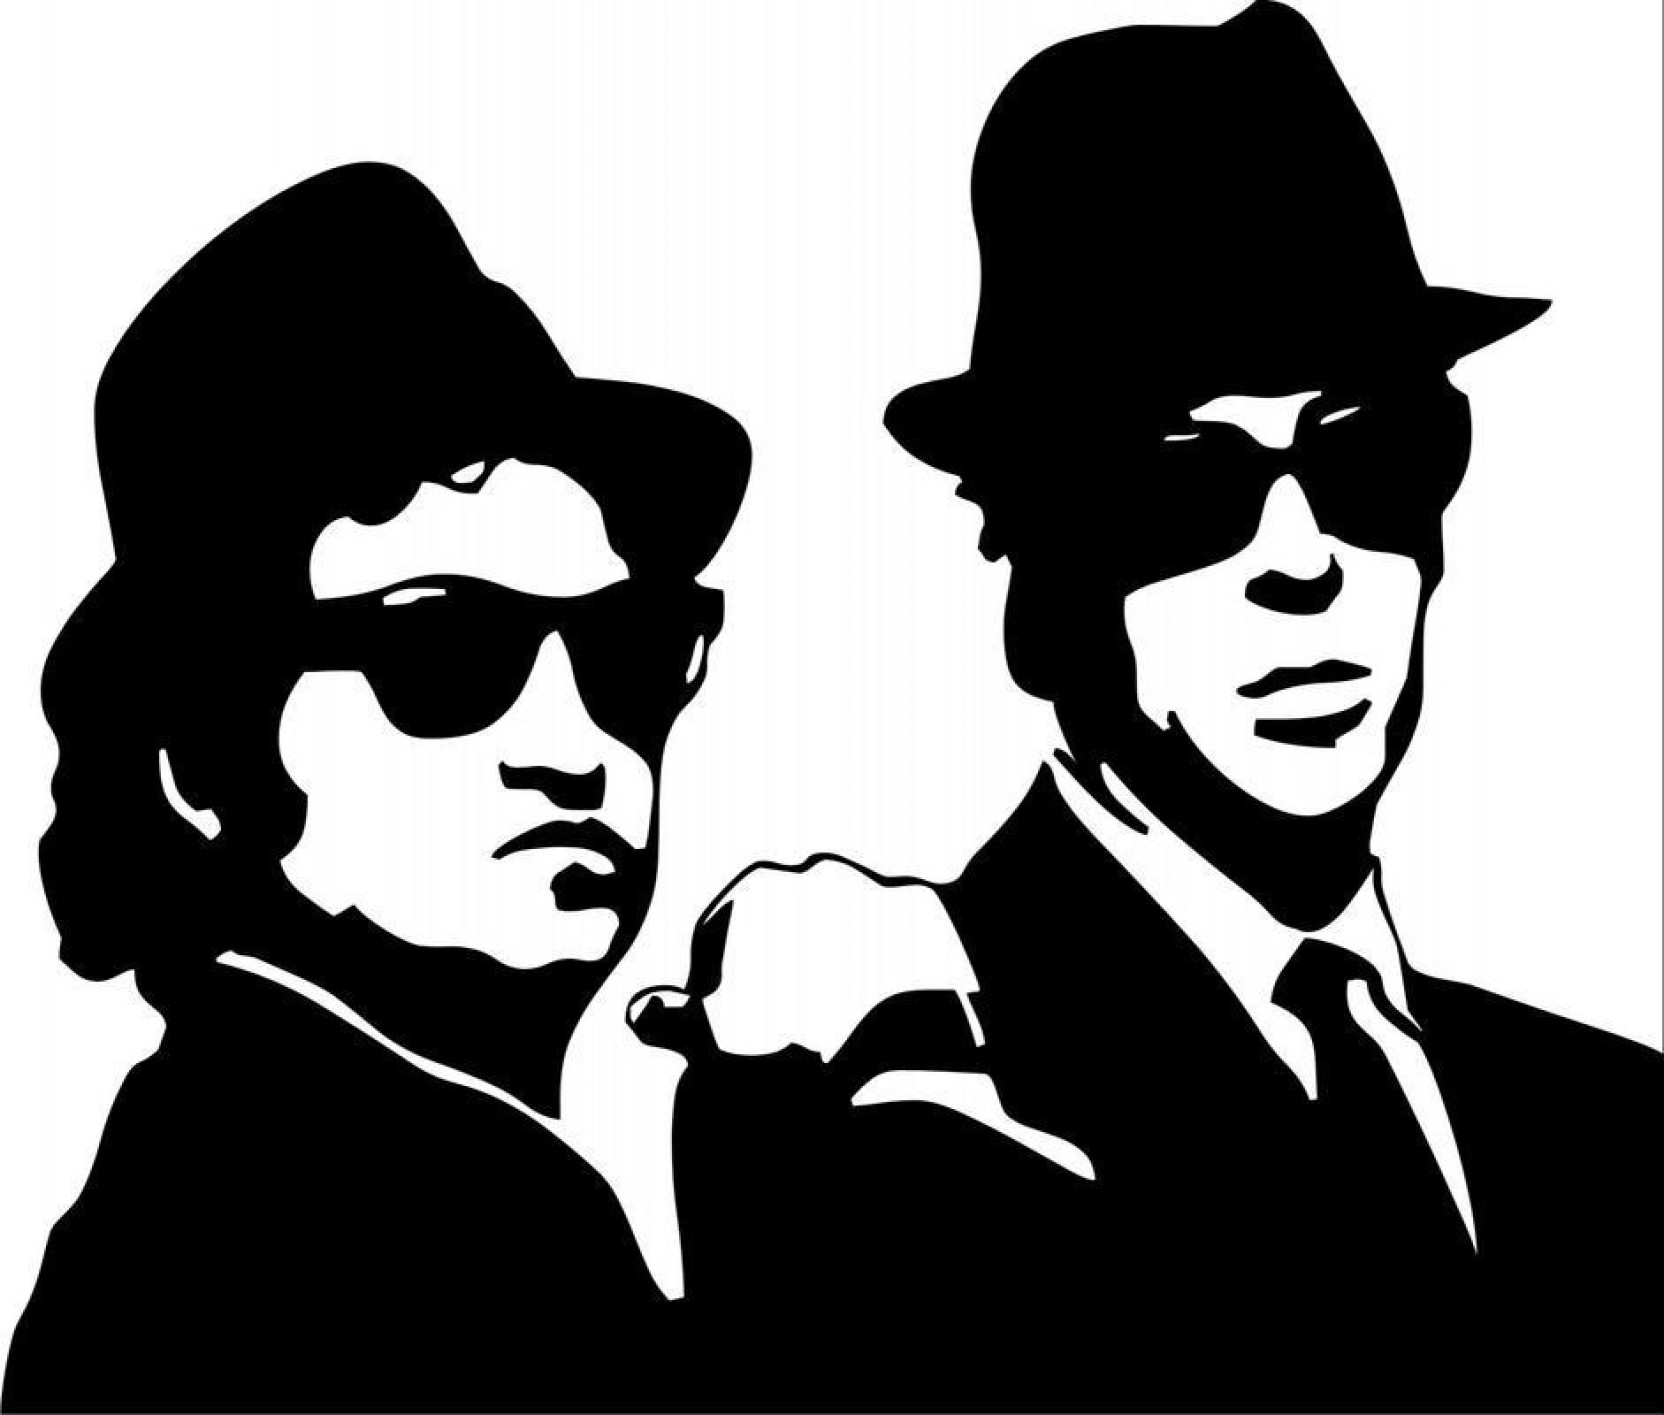 Blues Brothers Style D Movie Poster 13x19 inches